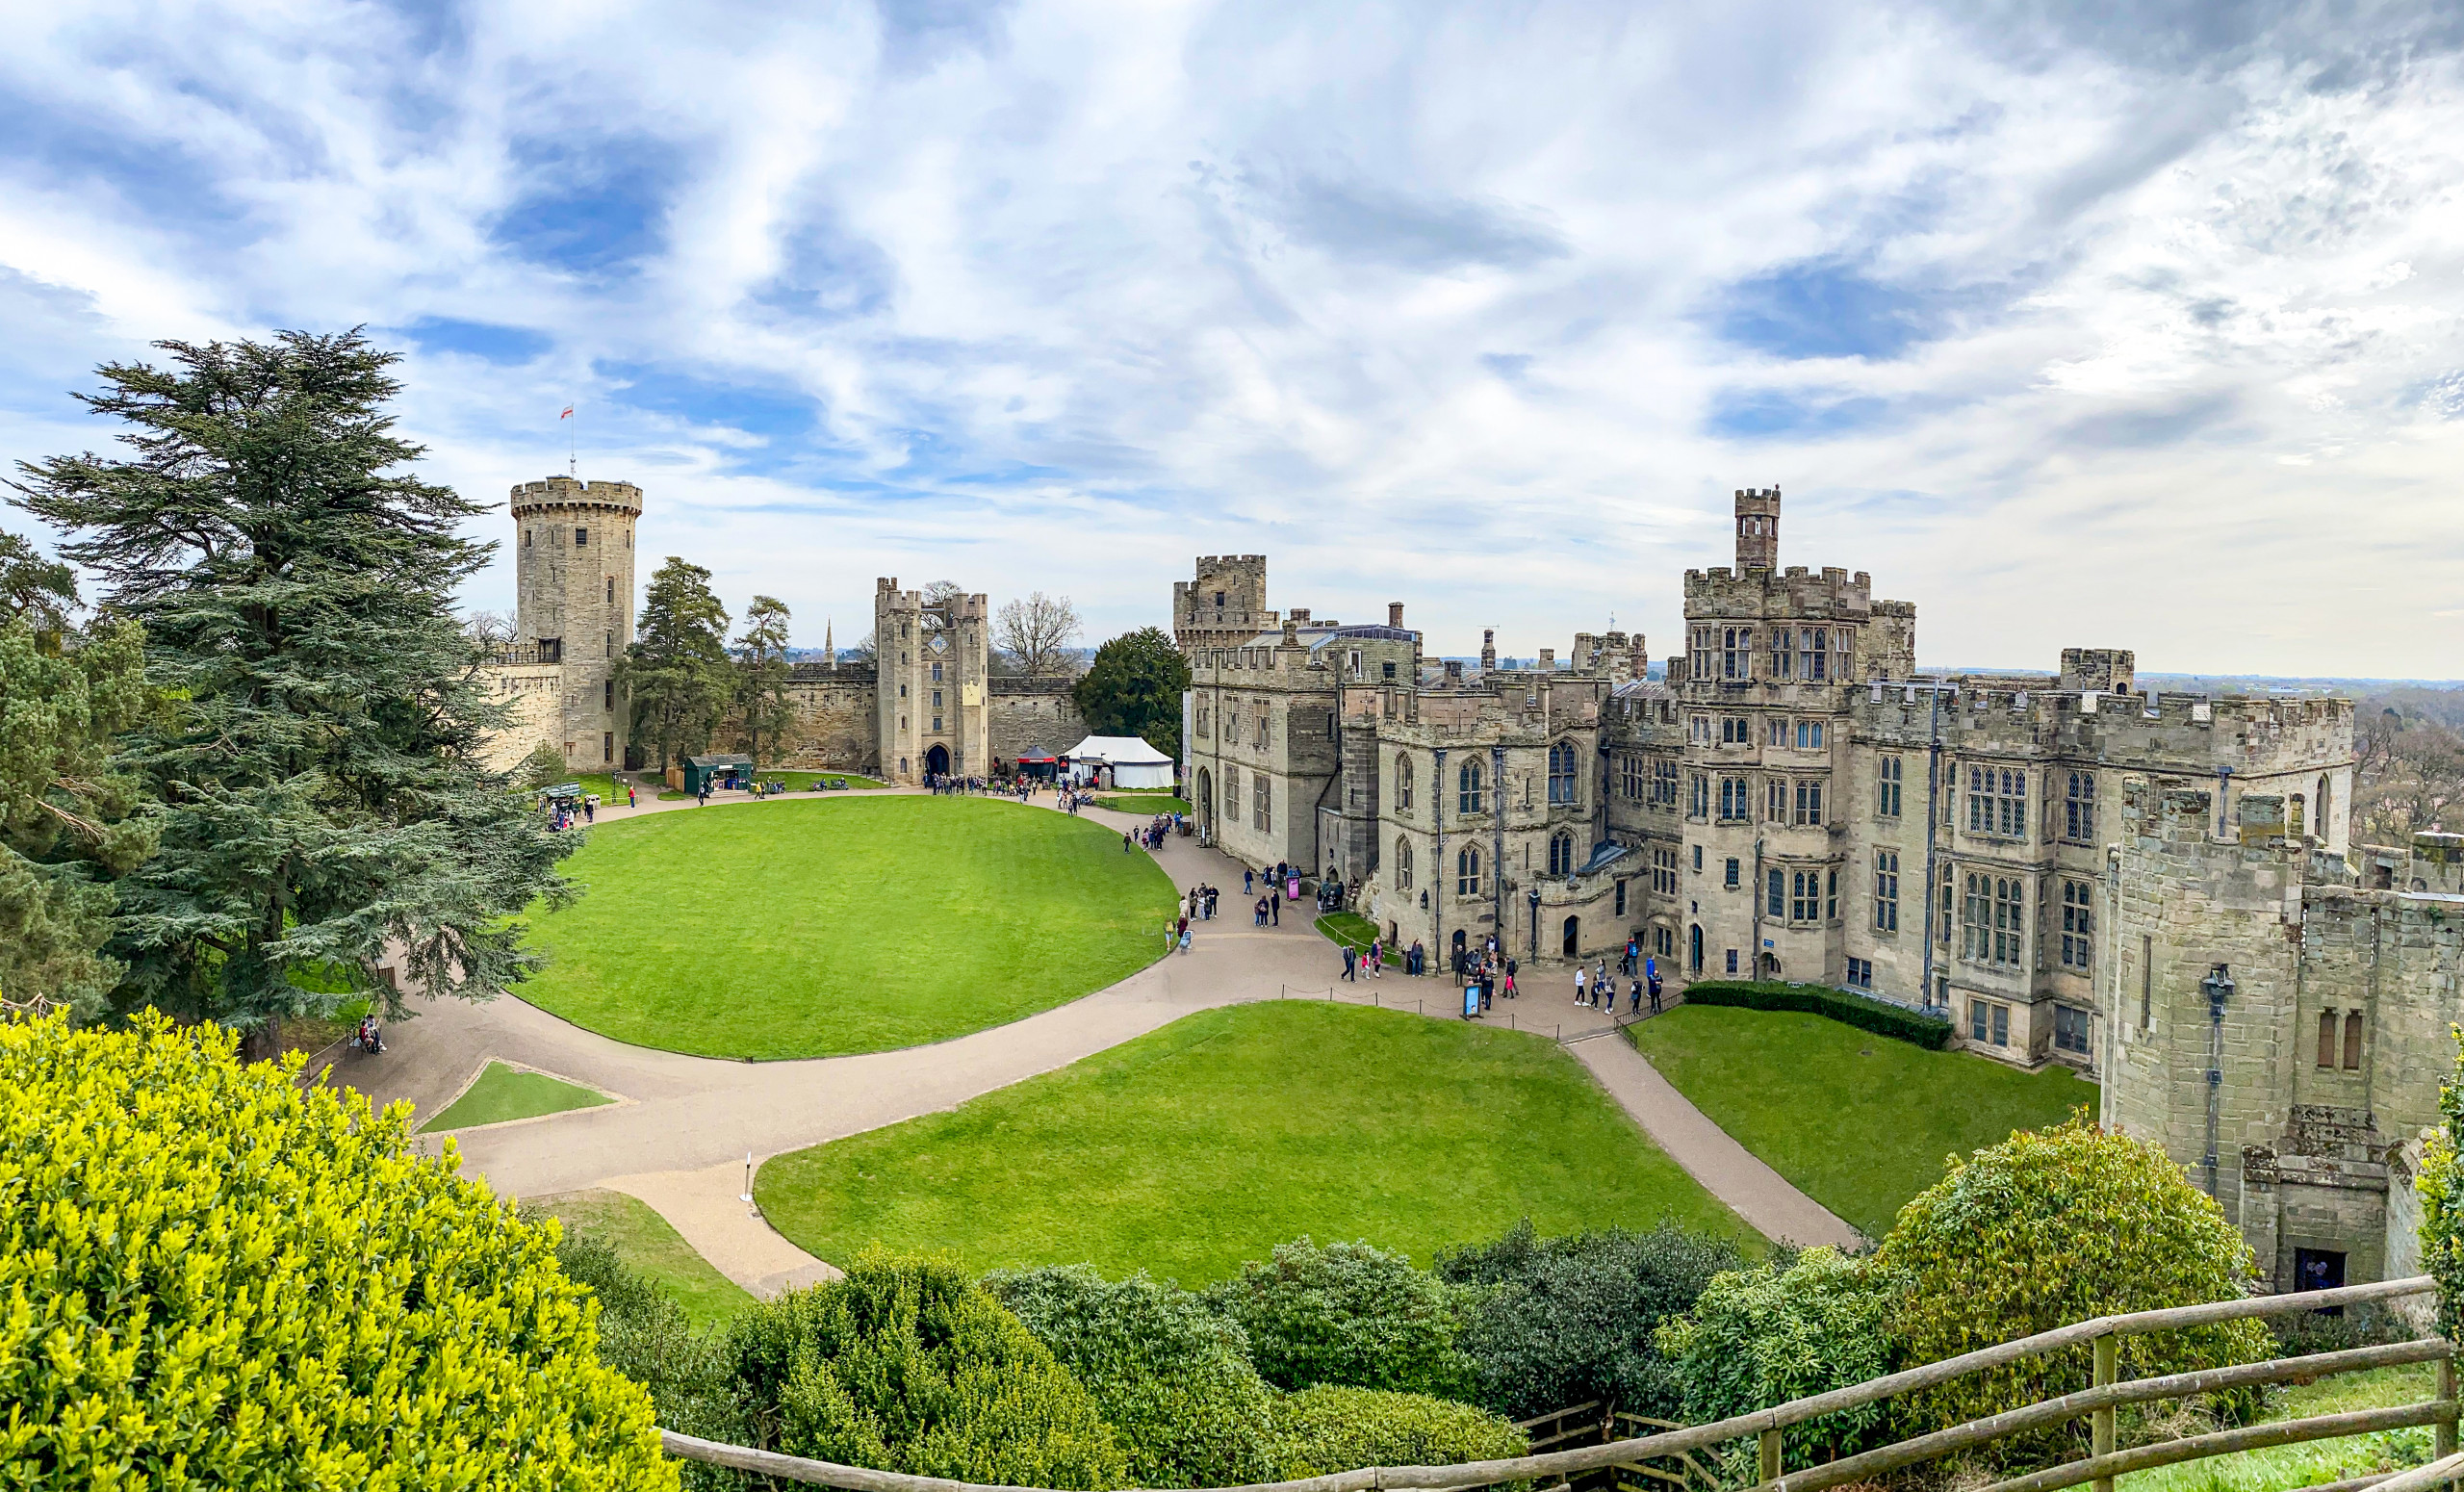 Warwick Castle Panoramic taken with iPhone 11 Pro